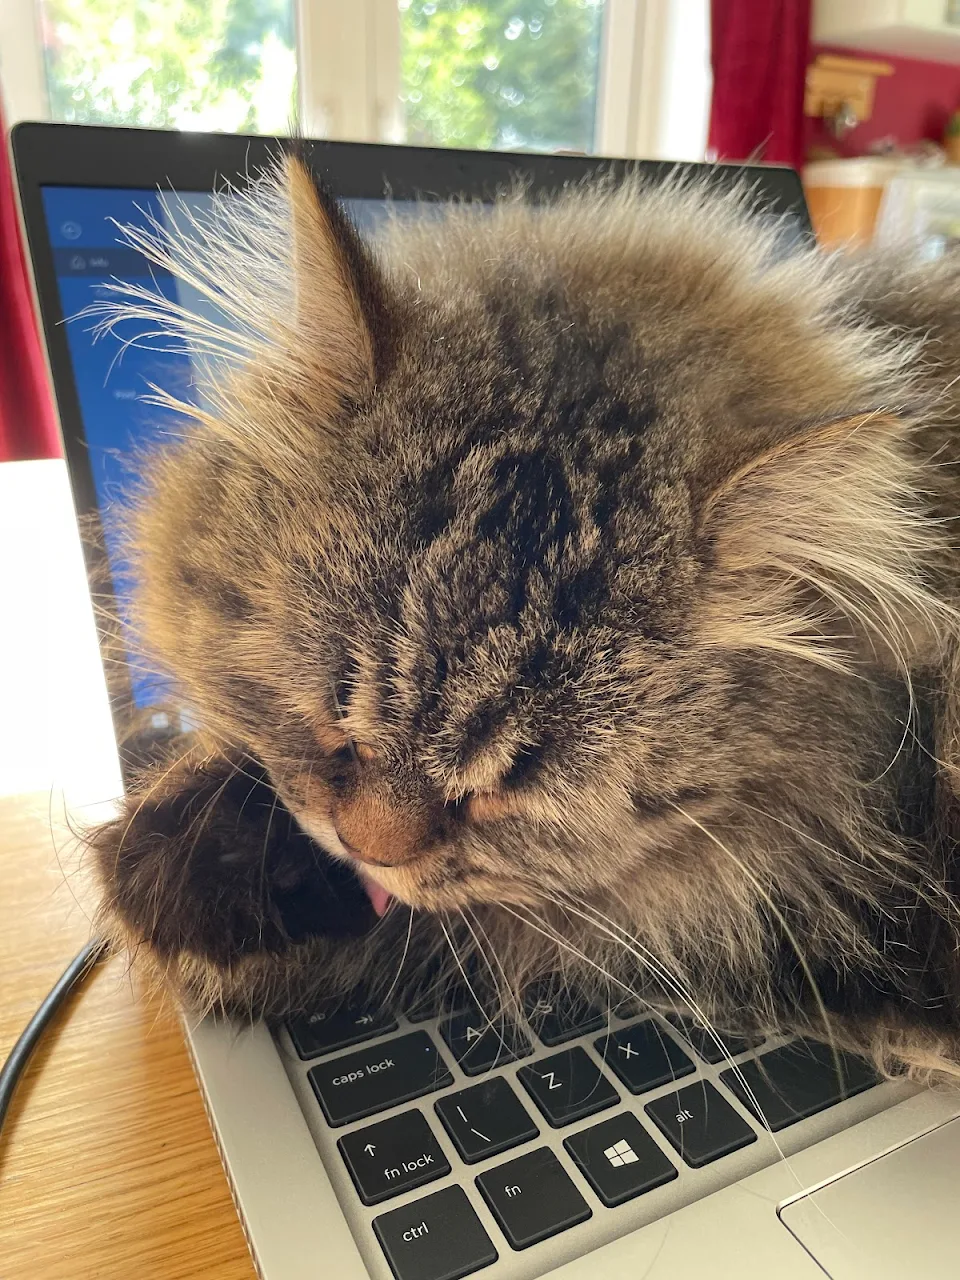 I don’t care that you need to write your report, Puss needs a wash and a warm tum….